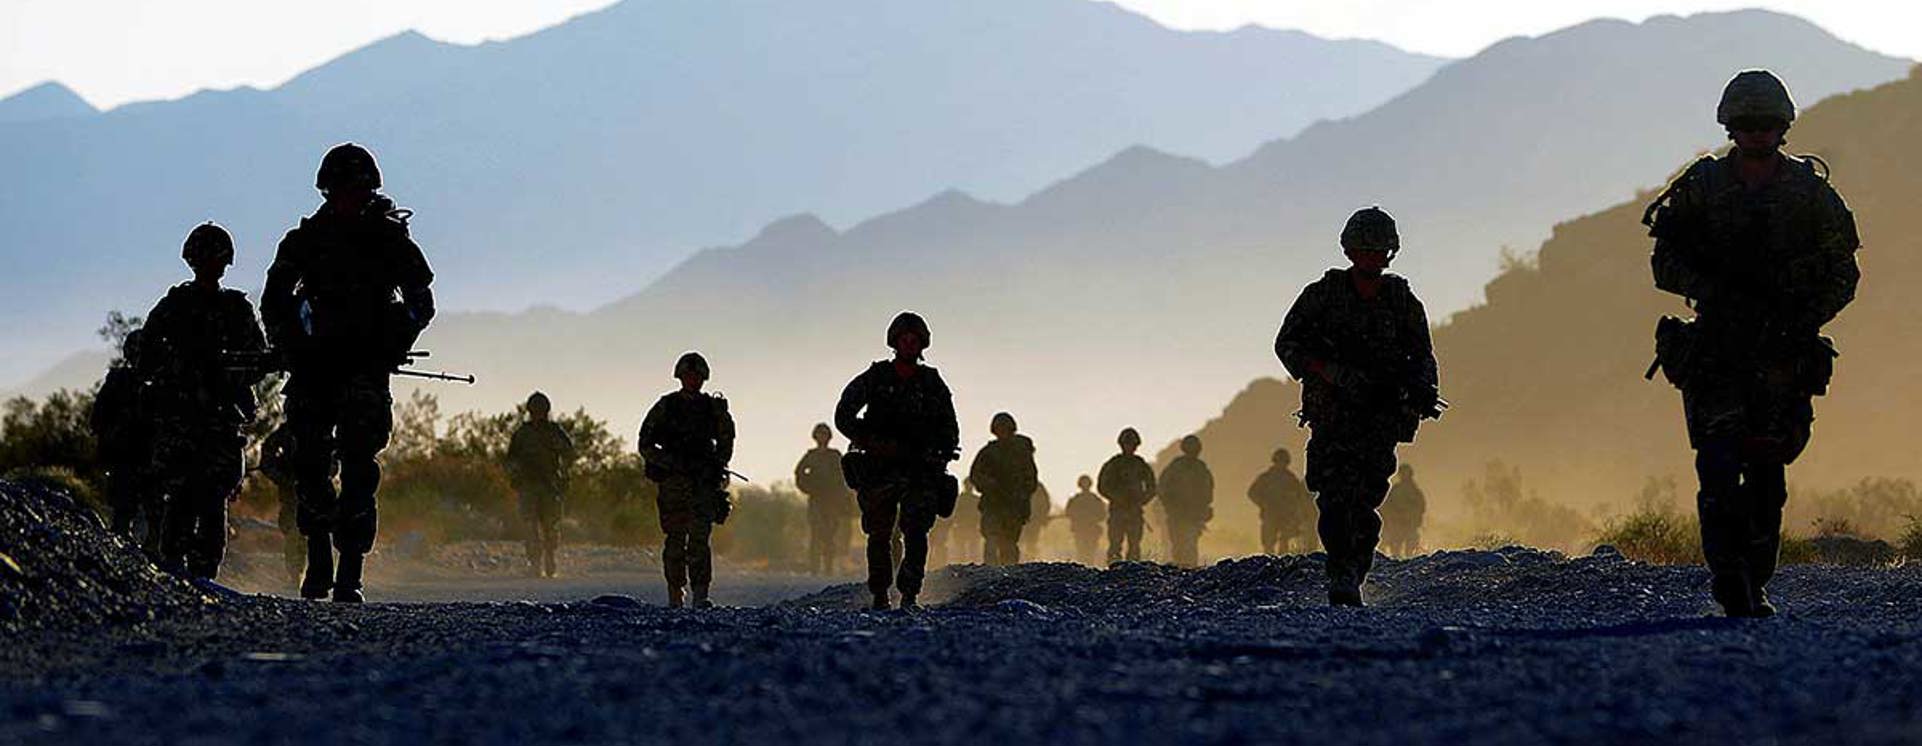 Army recruits during the Afghanistan War